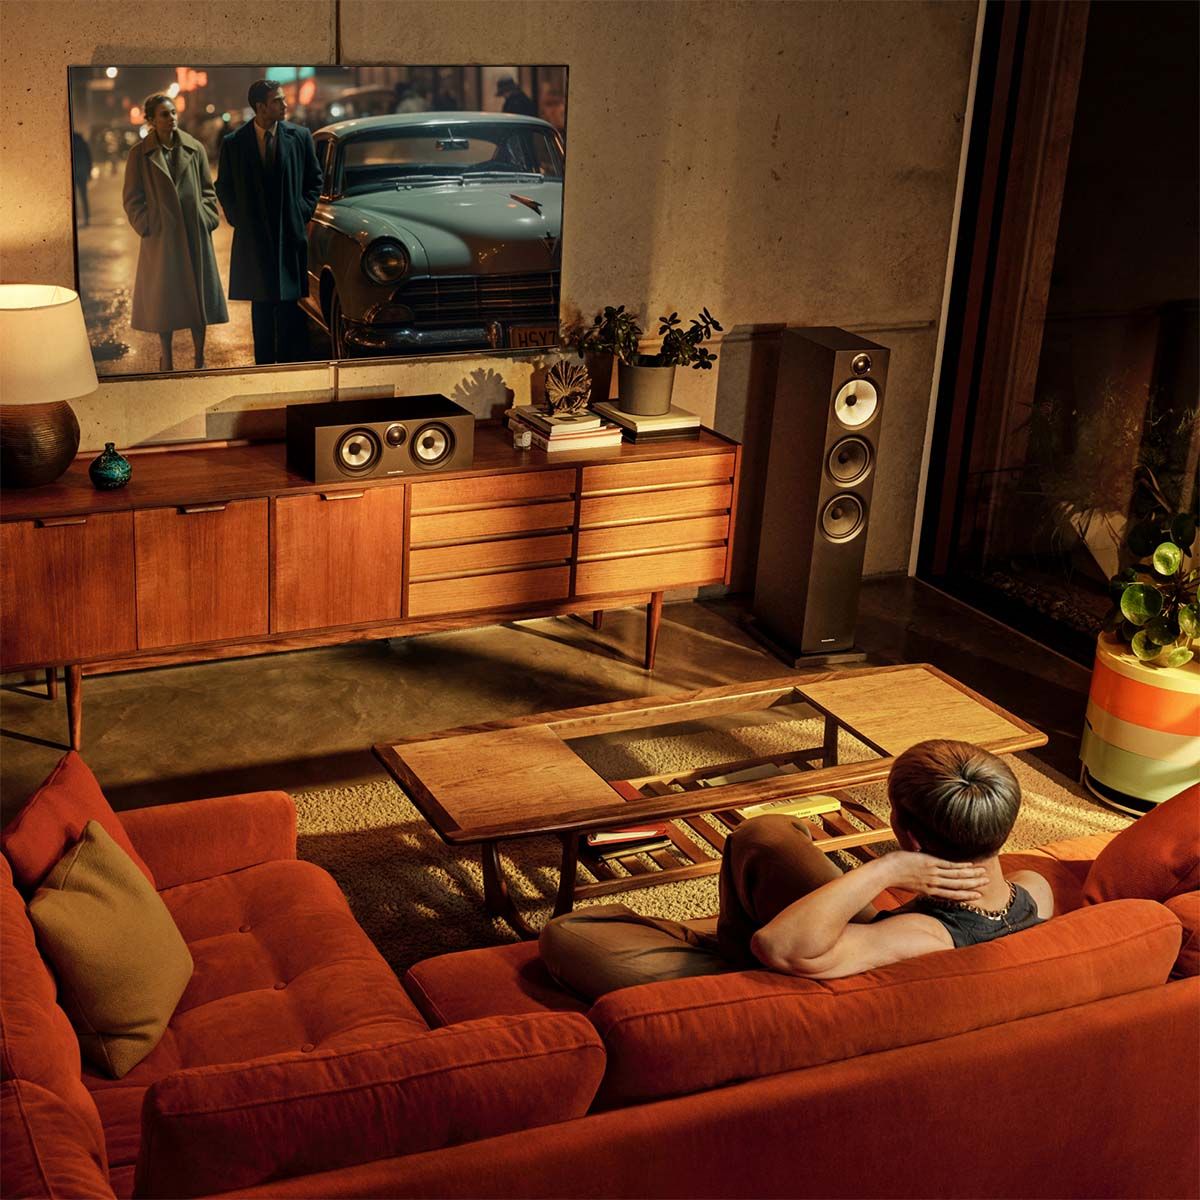 Bowers & Wilkins HTM6 S3 on media cabinet in living room home theater setup